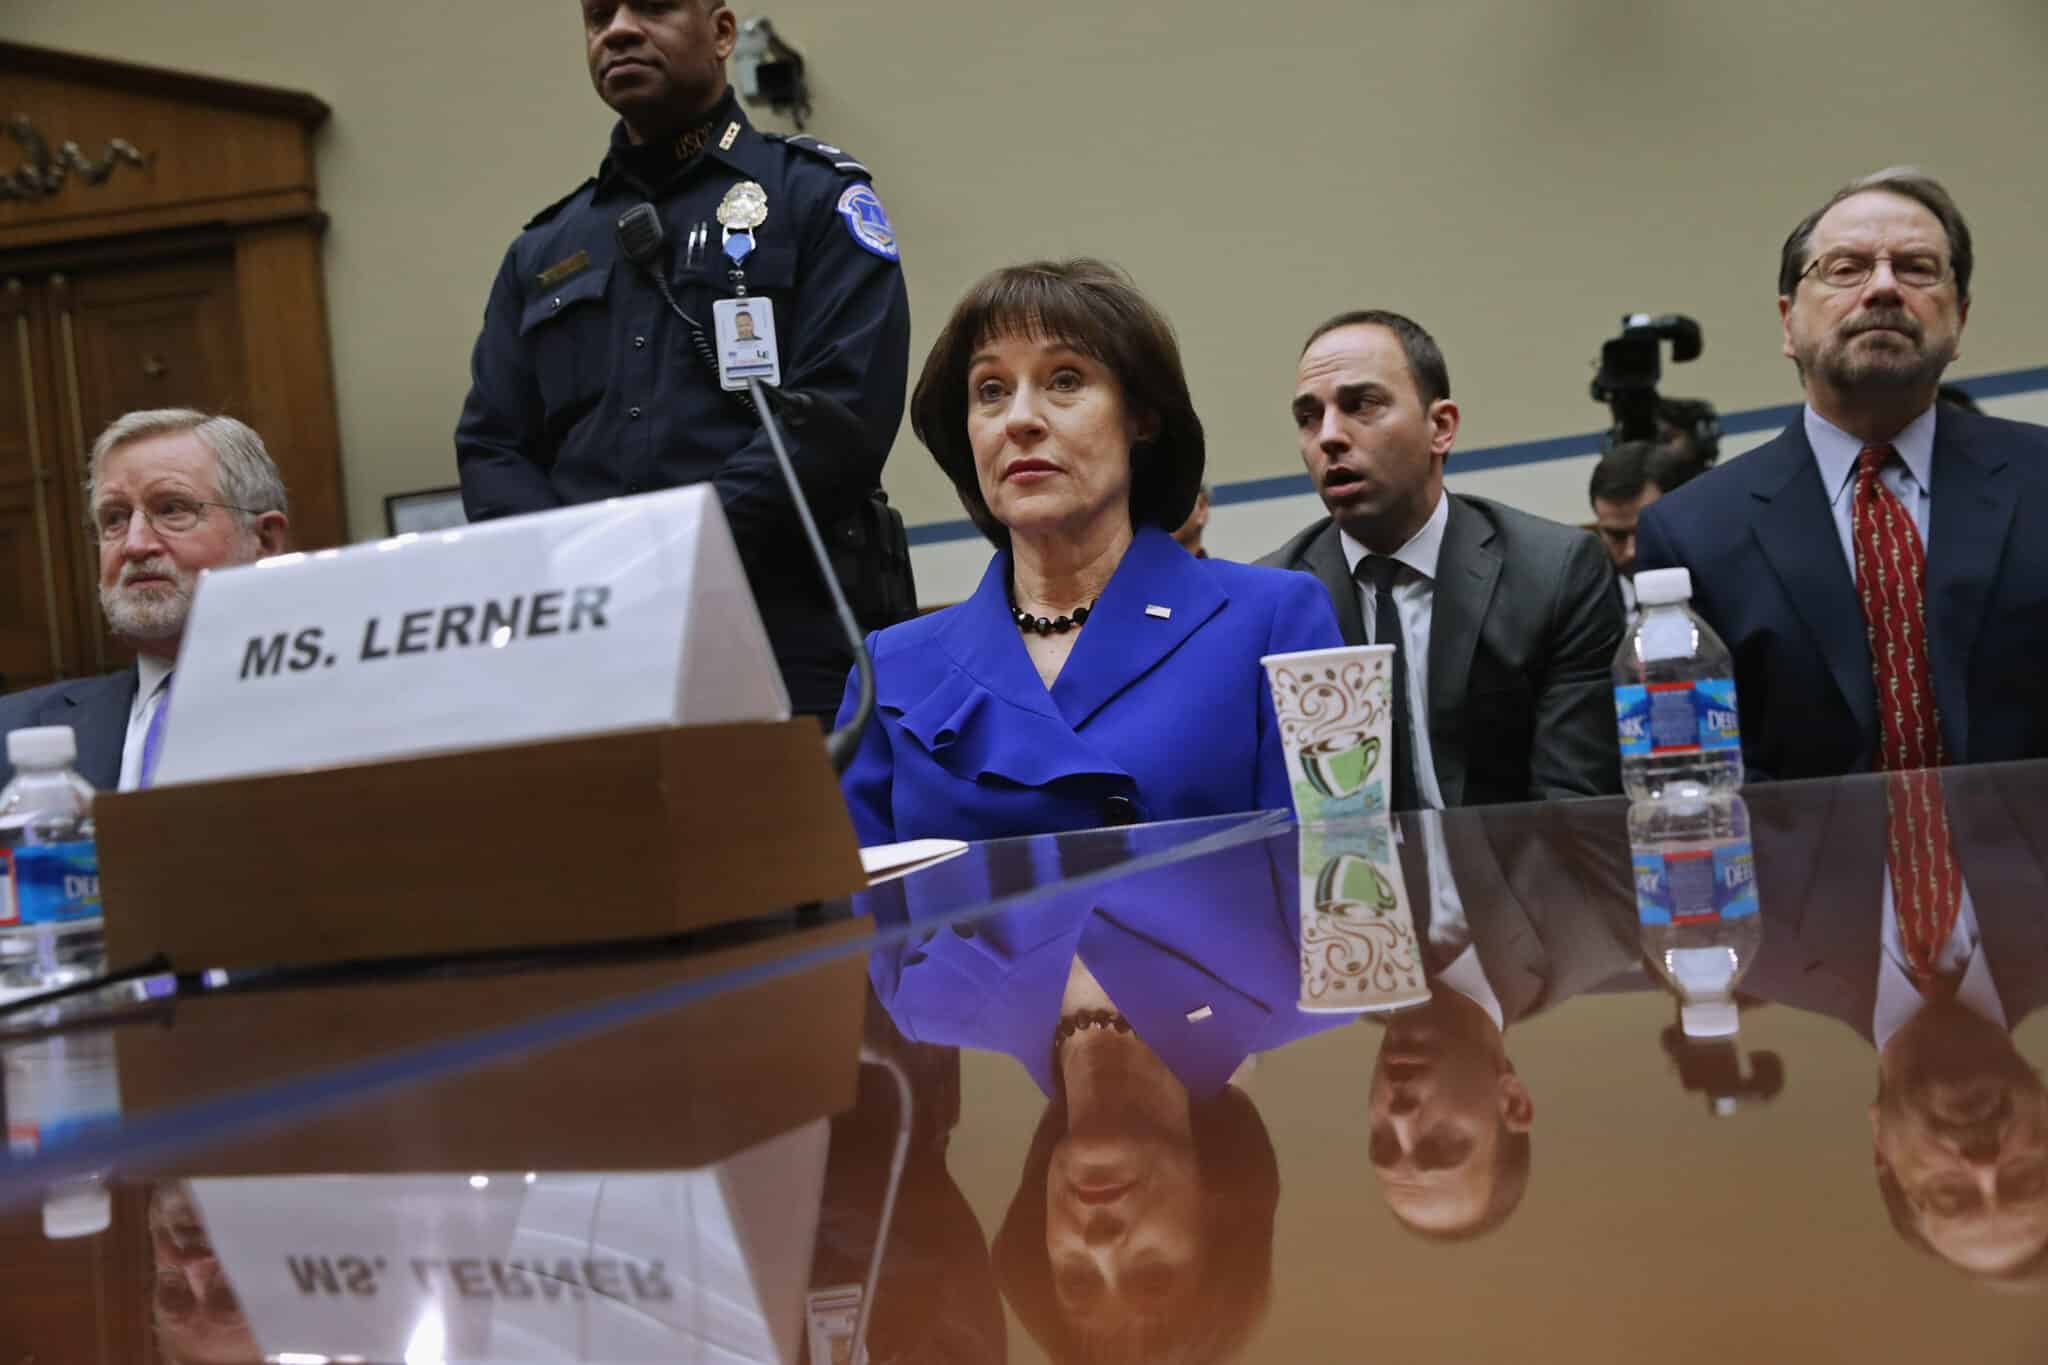 WASHINGTON, DC - MARCH 05:  Former Internal Revenue Service official Lois Lerner (C) exercises her Fifth Amendment right not to speak about the IRS targeting investigation before the House Oversight and Government Reform Committee during a hearing in the Rayburn House Office Building March 5, 2014 in Washington, DC. Chairman Darrell Issa (R-CA) adjuourned after Lerner refused to answer questions about the investigation.  (Photo by Chip Somodevilla/Getty Images)